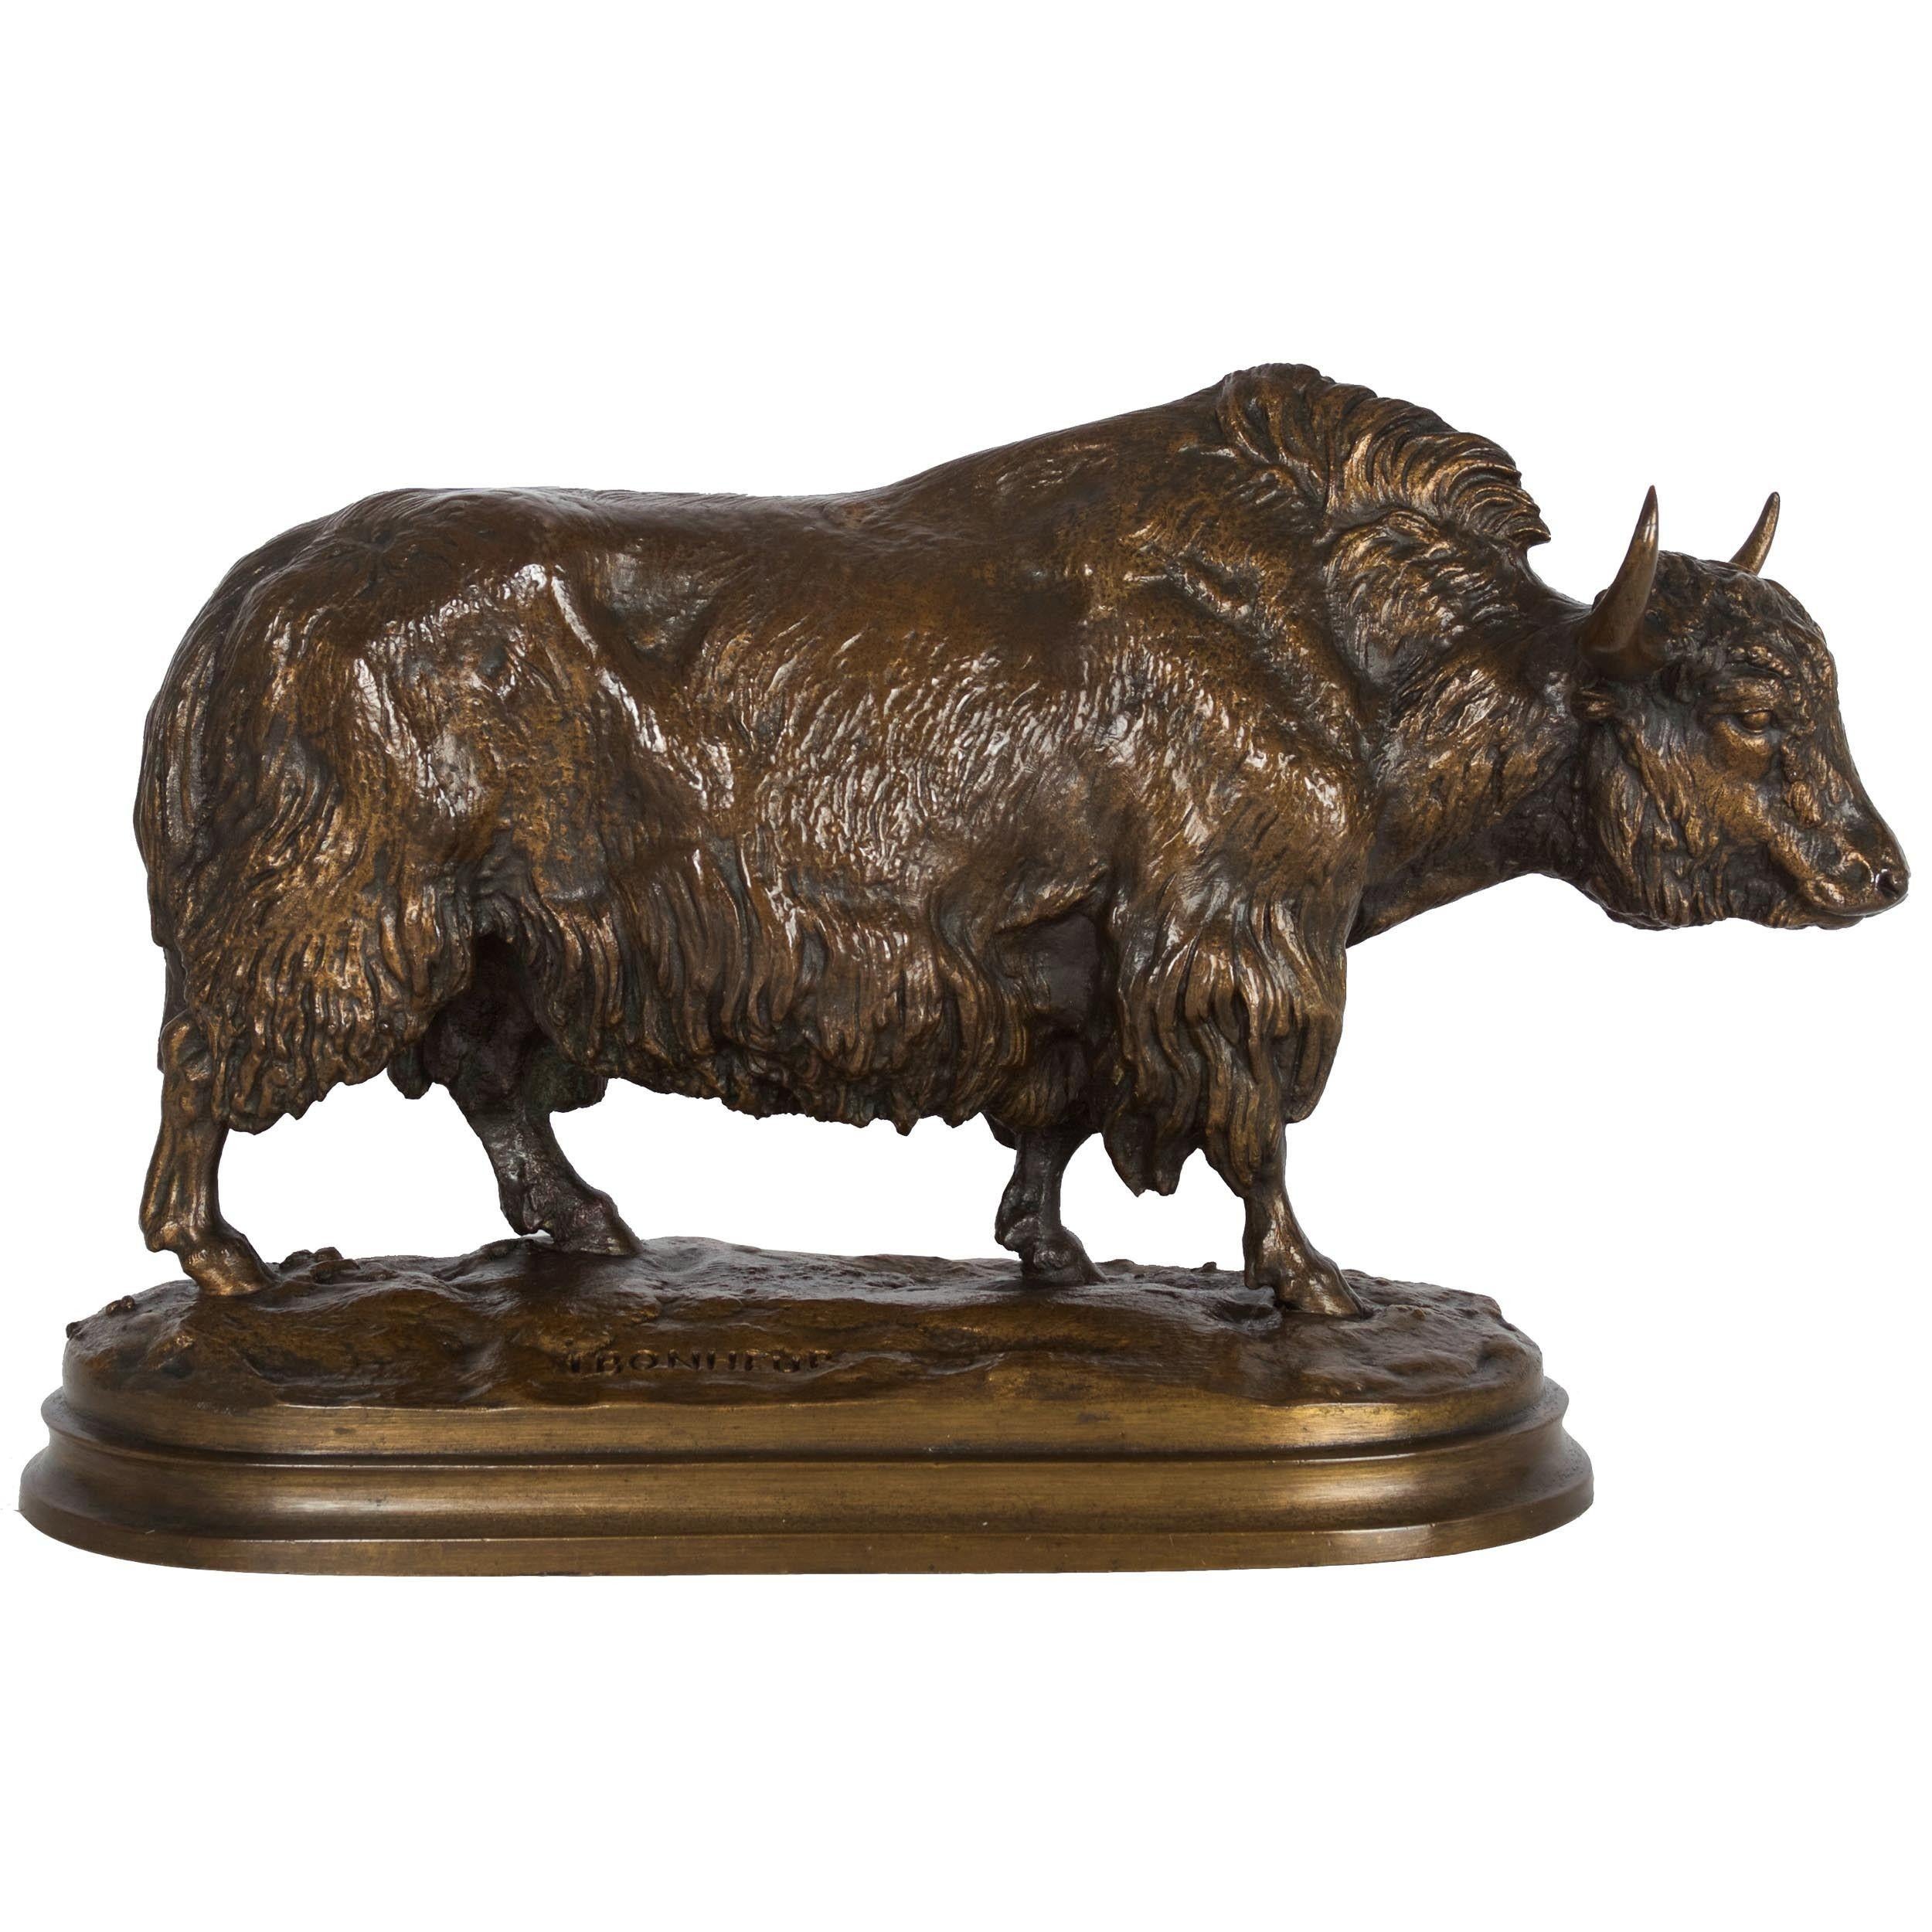 A fine example of Bonheur's very scarce model depicting a standing European Wood Bison, also known as a Bison Bonasus, this sand-cast example was almost certainly produced by his brother-in-law, Hippolyte Peyrol. Unmarked by the foundry, the work